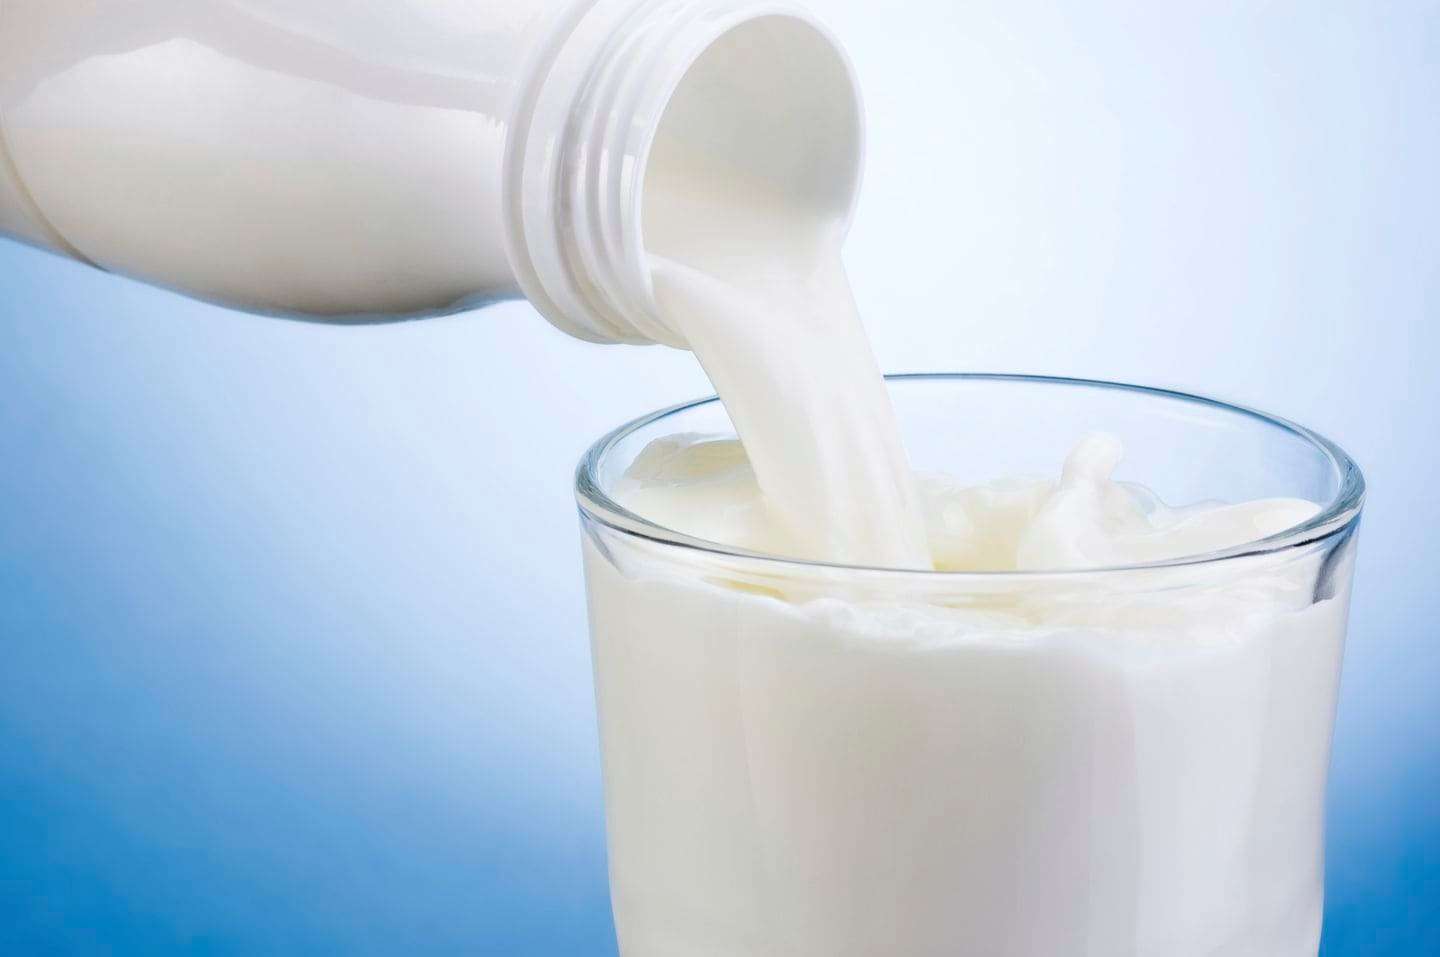 Drinking milk probably does not cause breast cancer